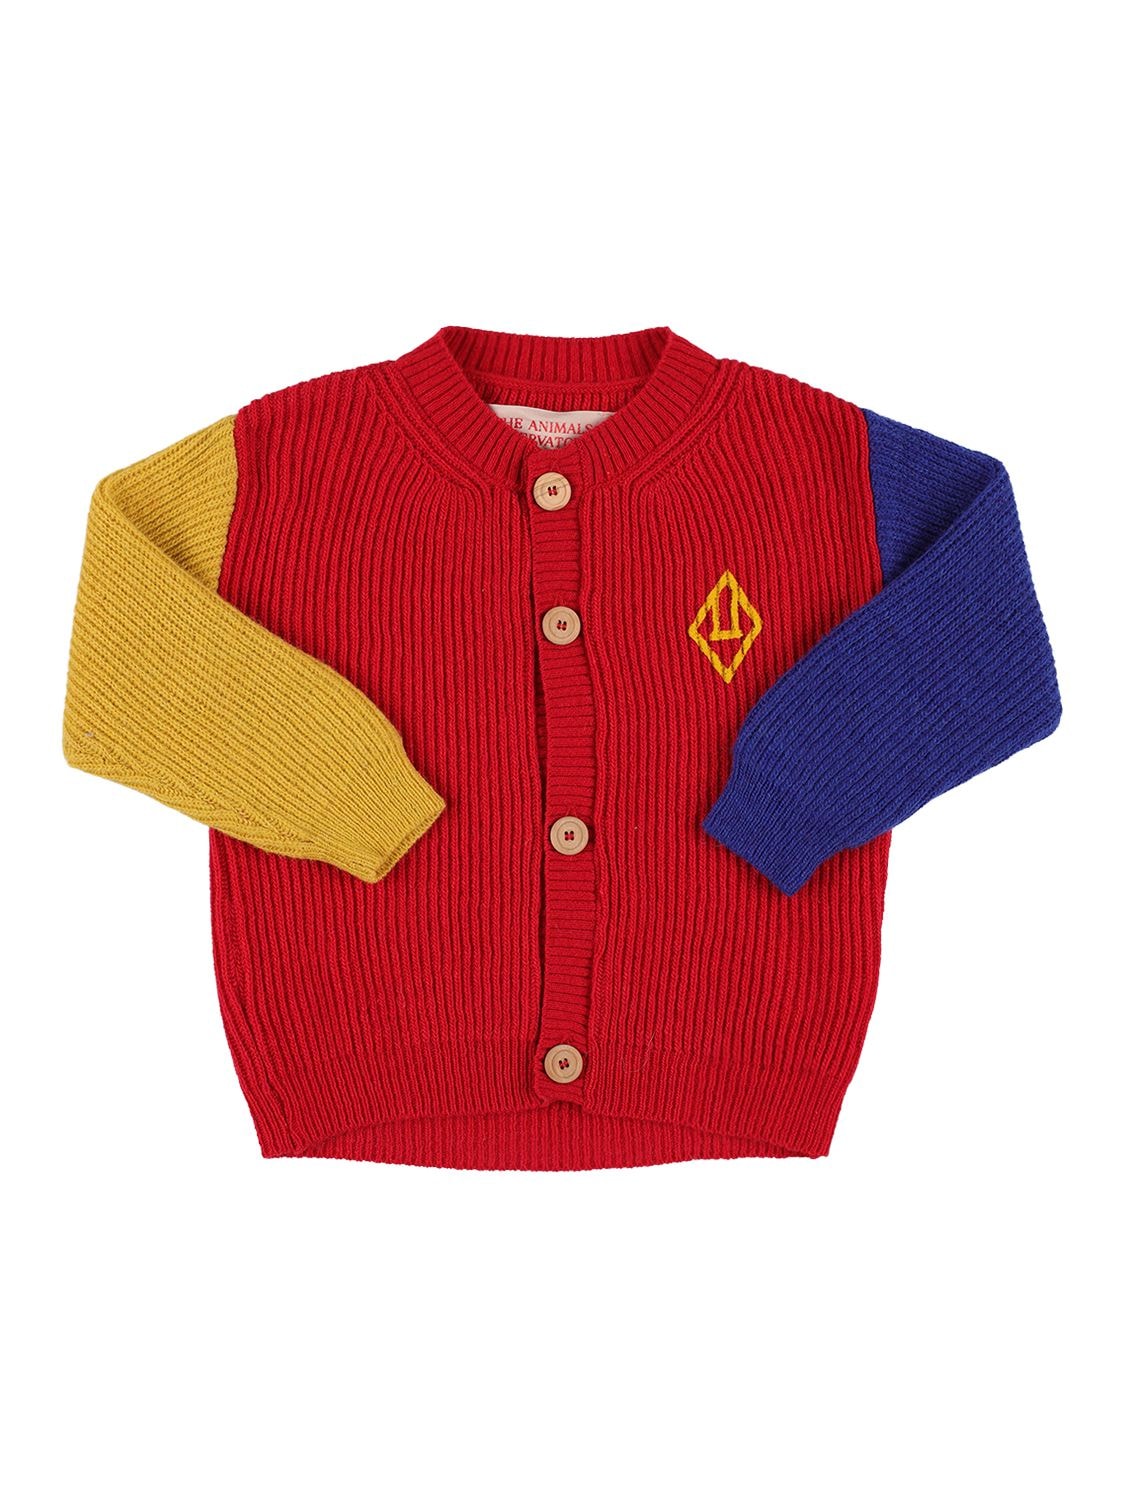 THE ANIMALS OBSERVATORY WOOL BLEND KNIT CARDIGAN